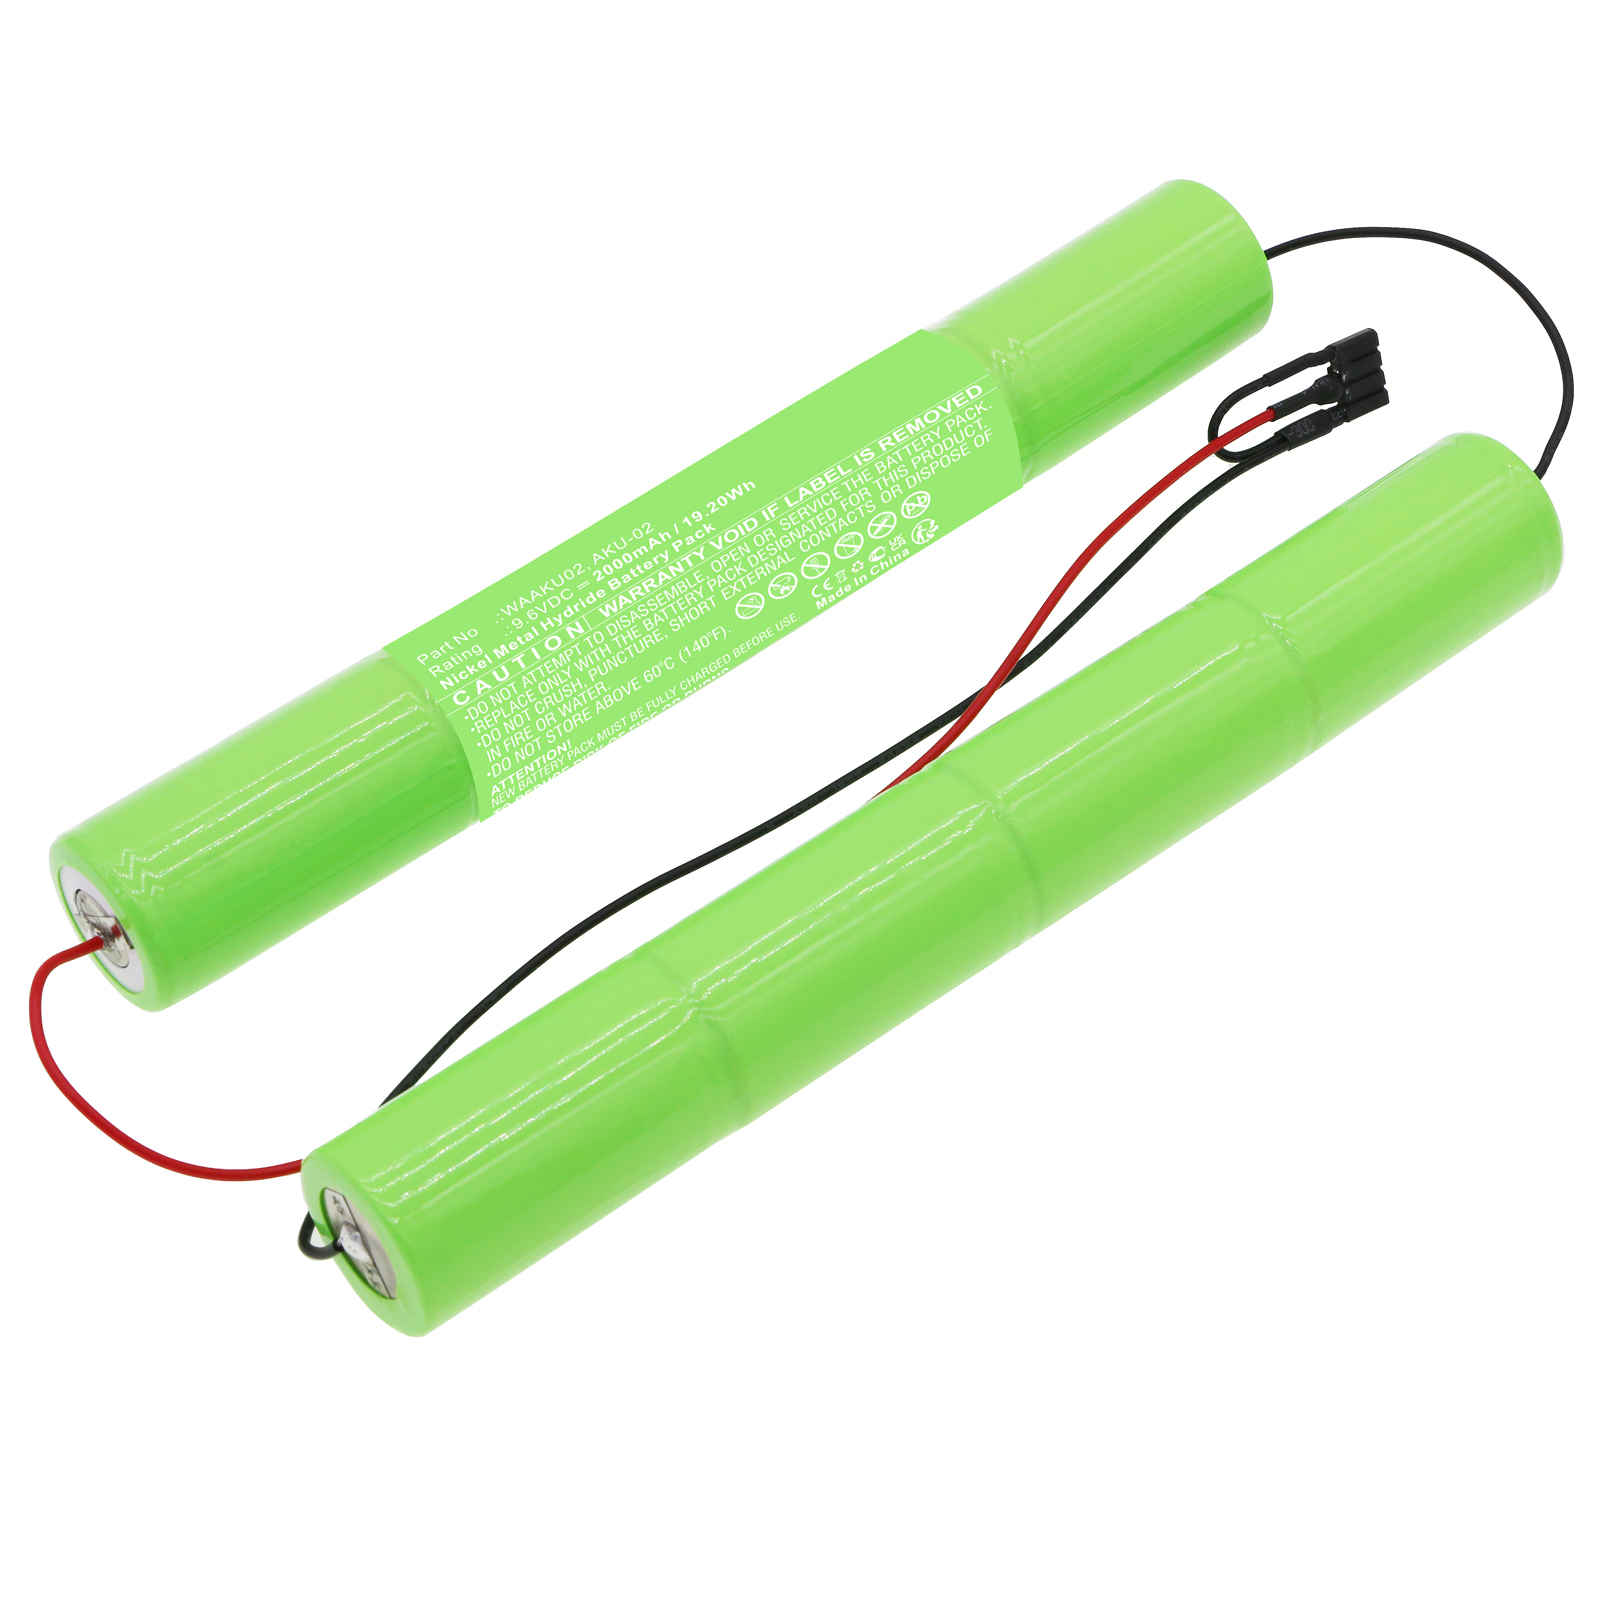 Synergy Digital Equipment Battery Compatible with SONEL AKU-02 Equipment Battery (Ni-MH, 9.6V, 2000mAh)